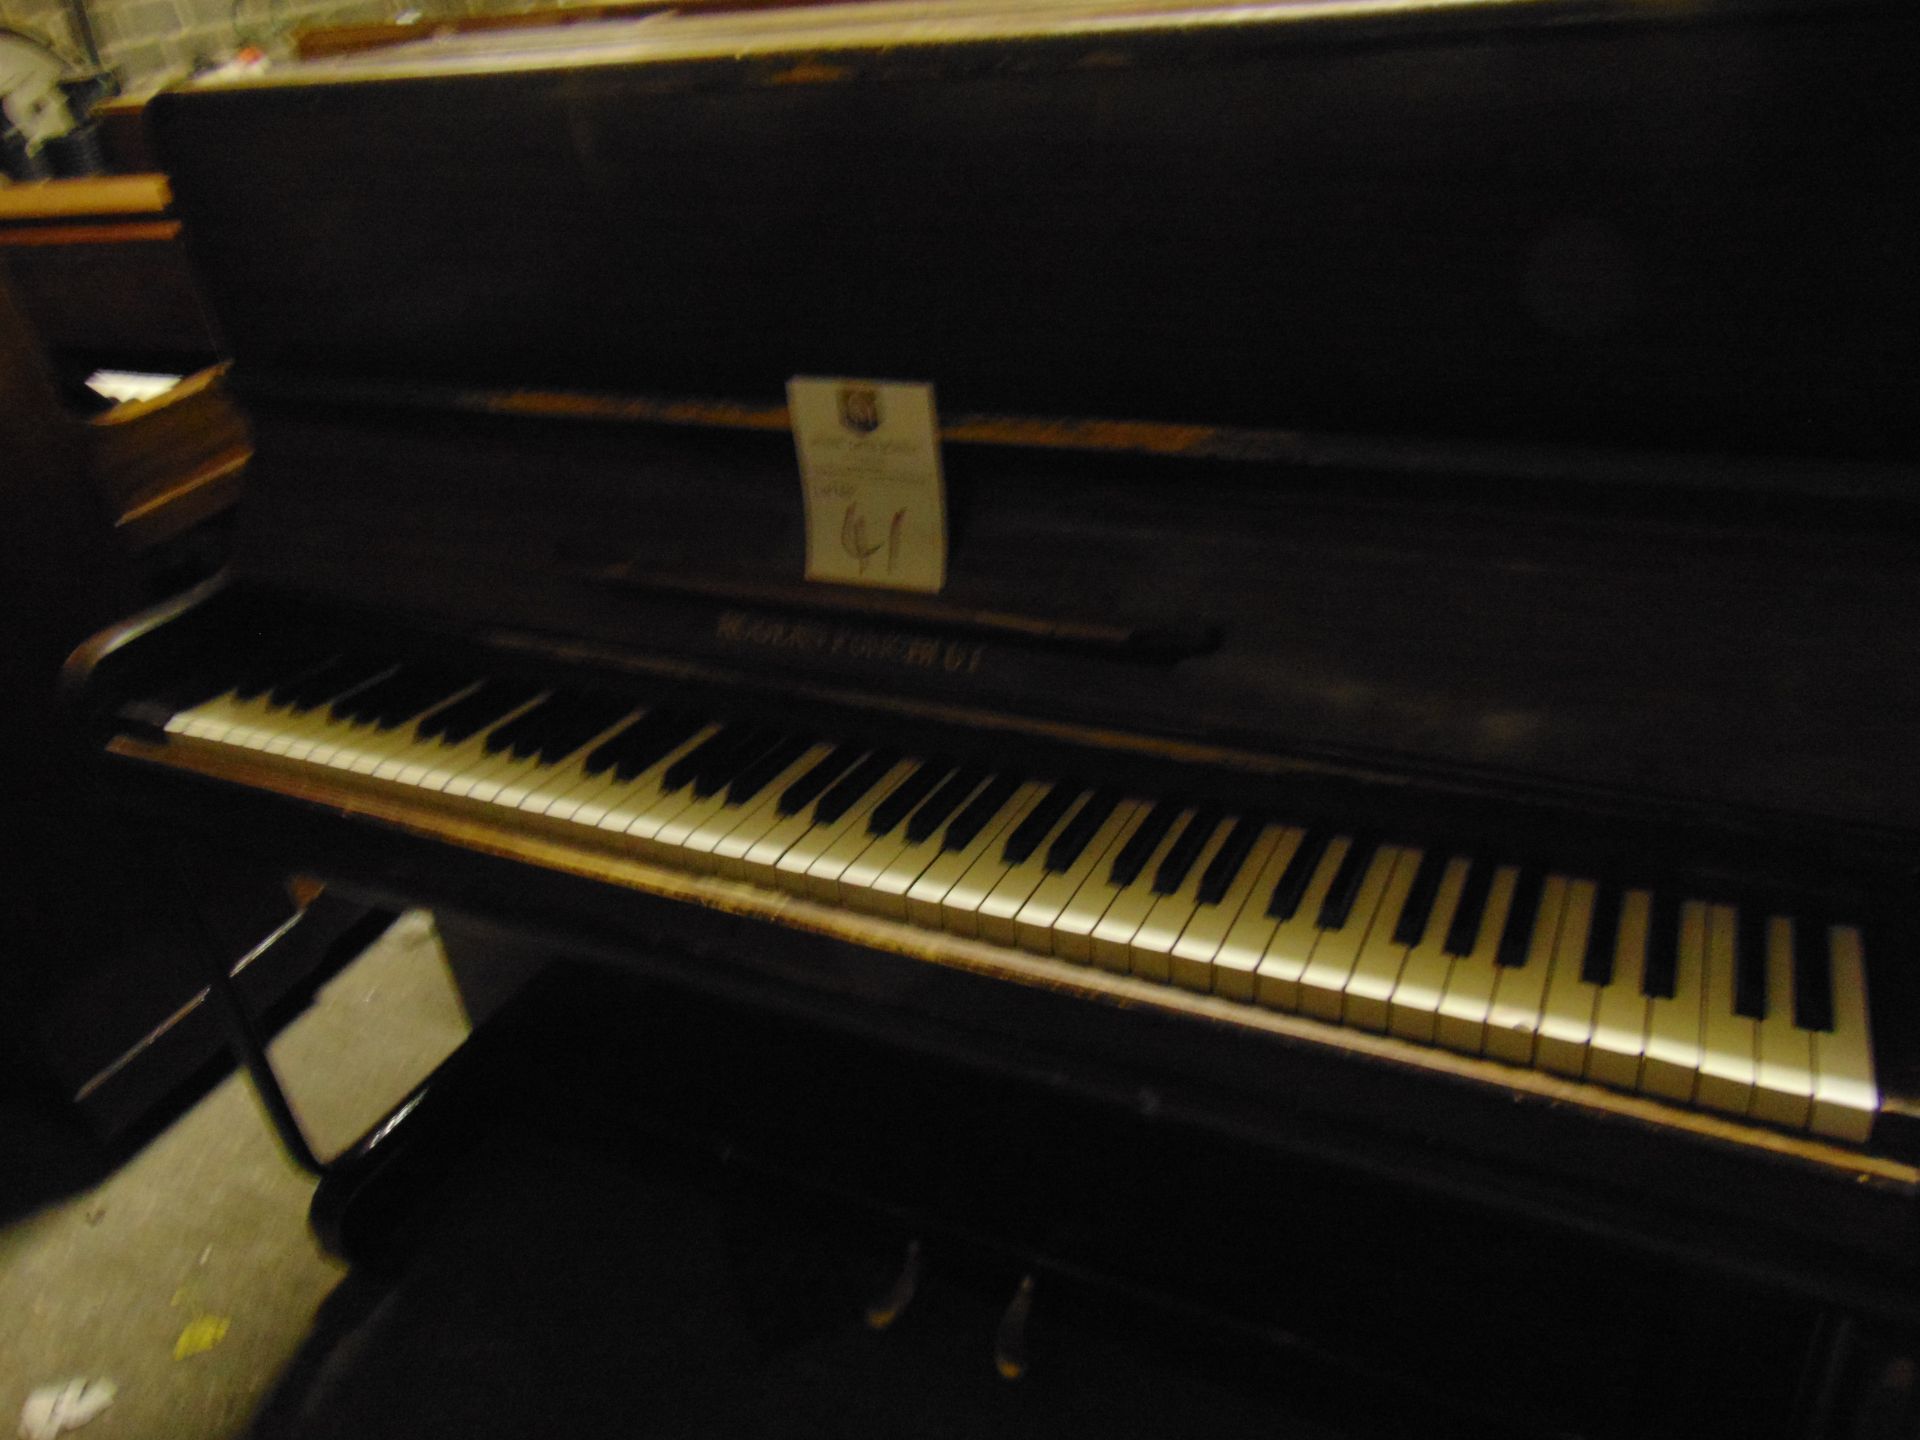 Rogers Eungblut Piano - Image 3 of 3